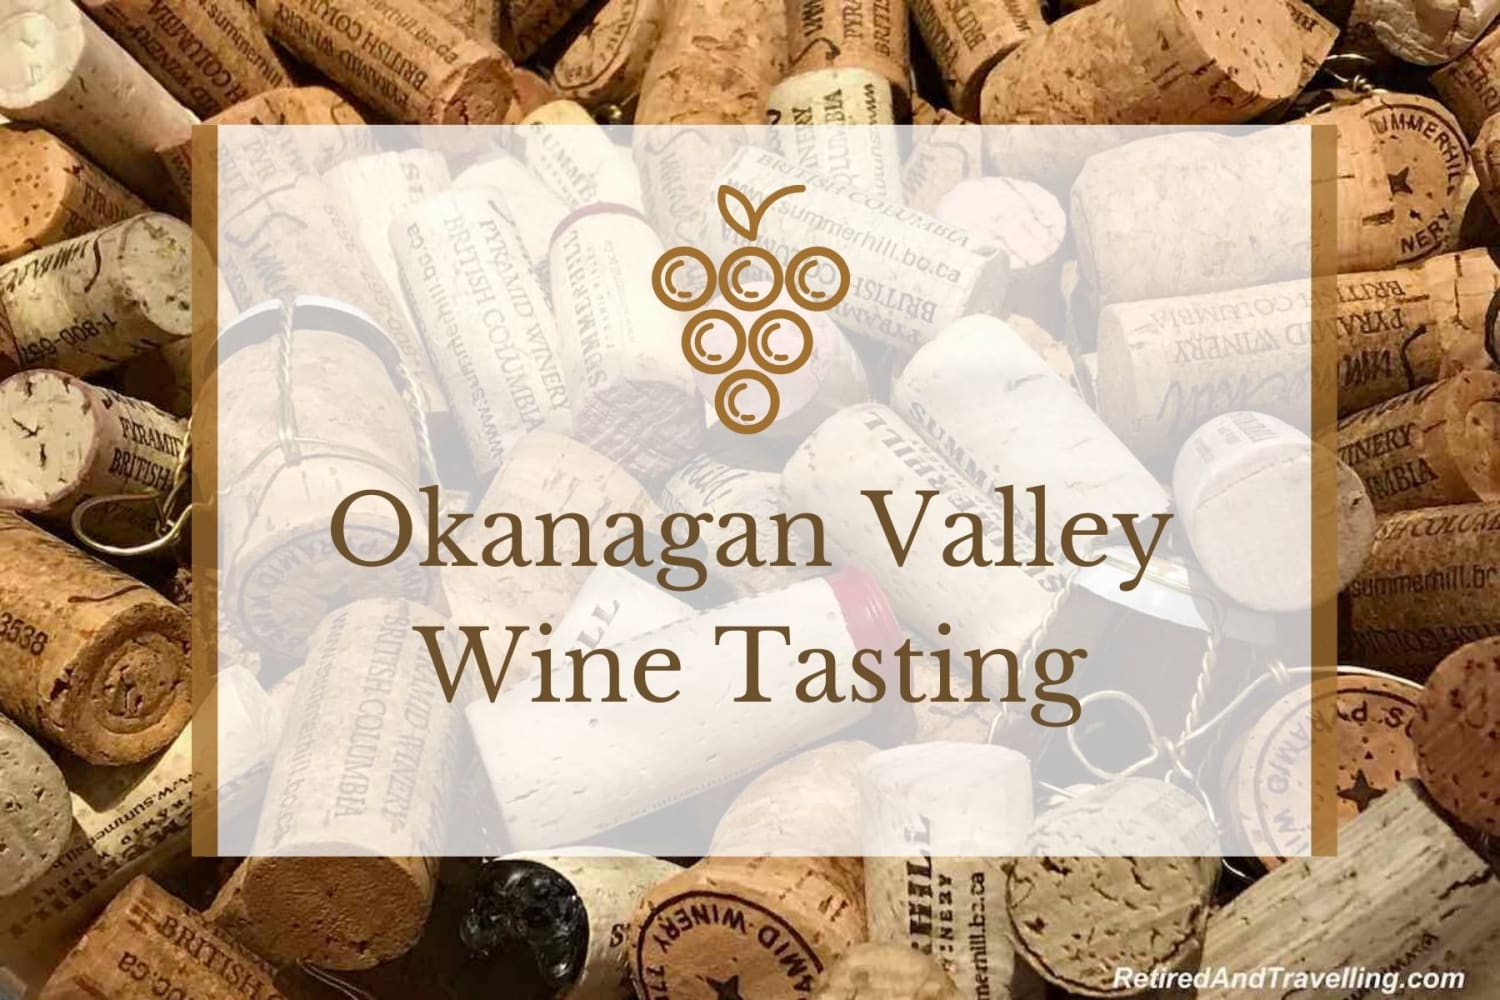 Enjoy A Visit For Okanagan Valley Wine Tasting - Retired And Travelling